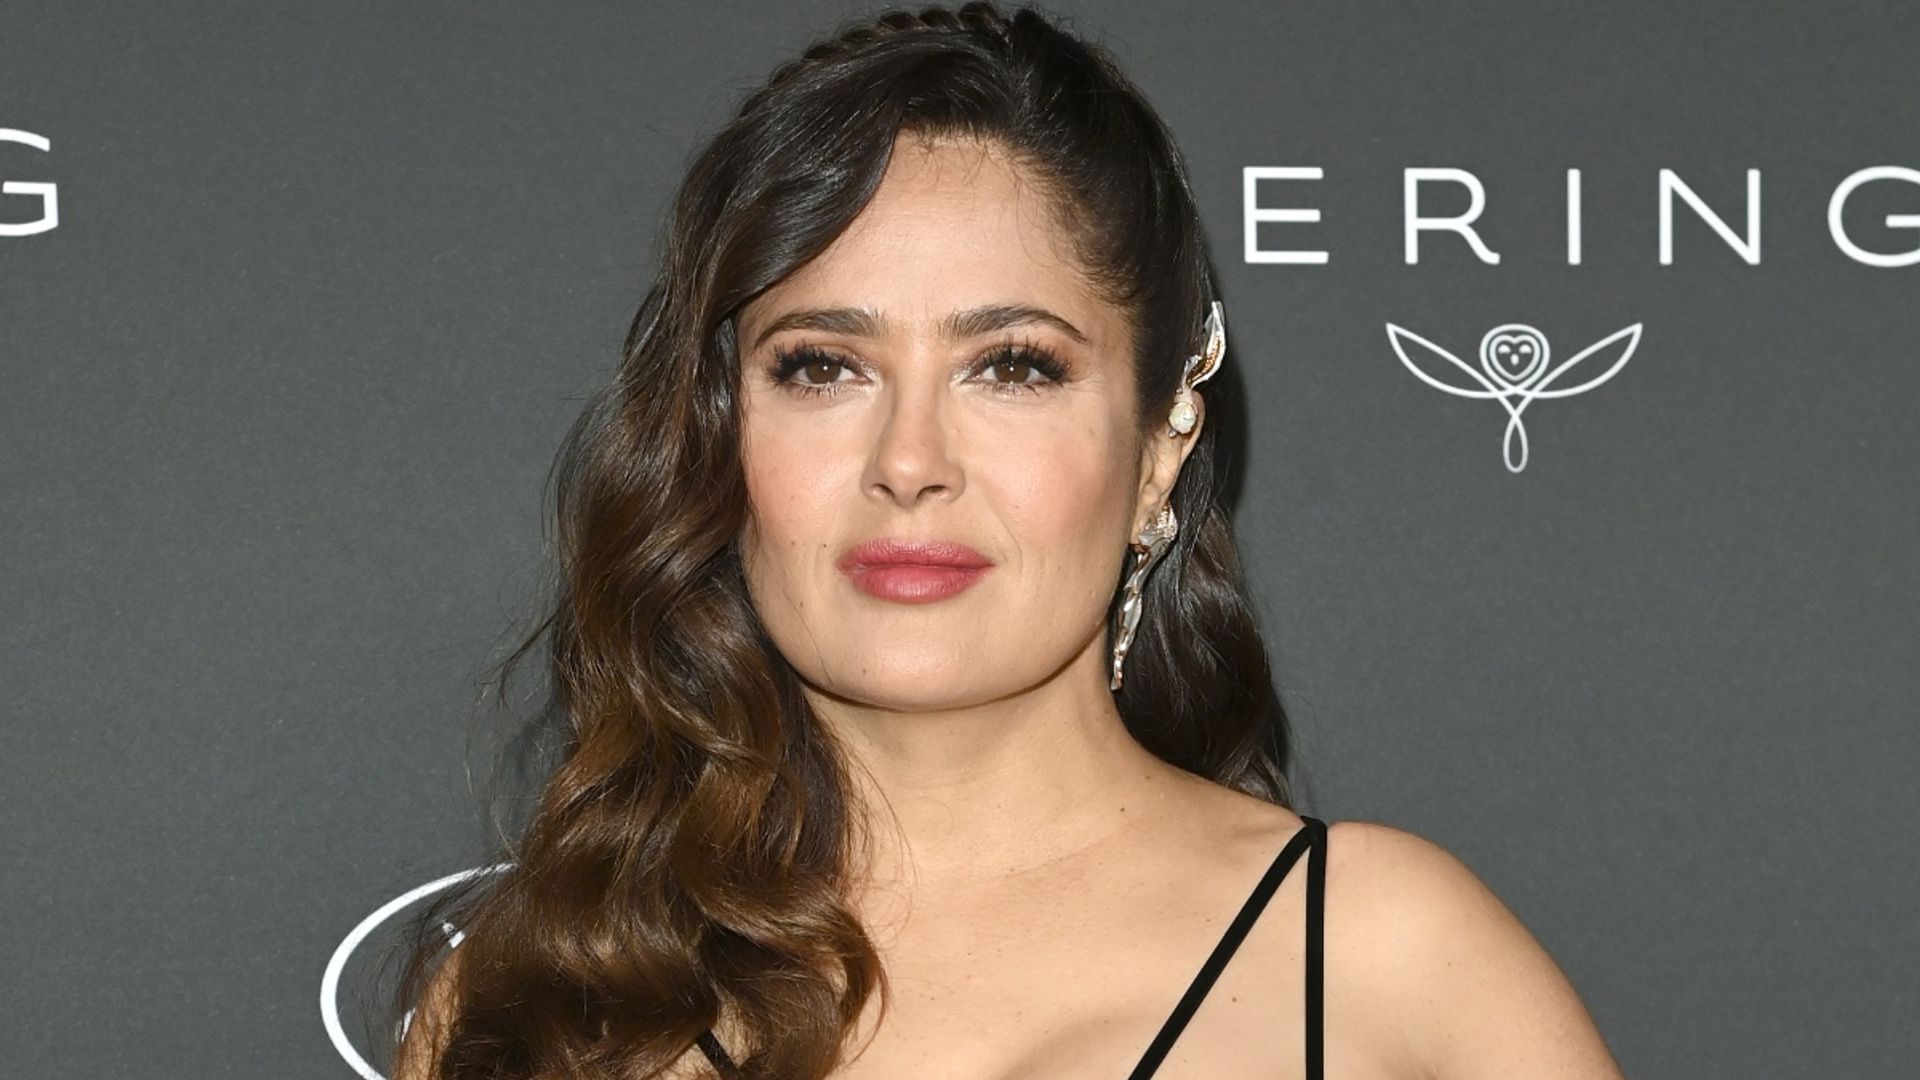 Salma Hayek commands attention in a dazzling gold gown in amazing throwback